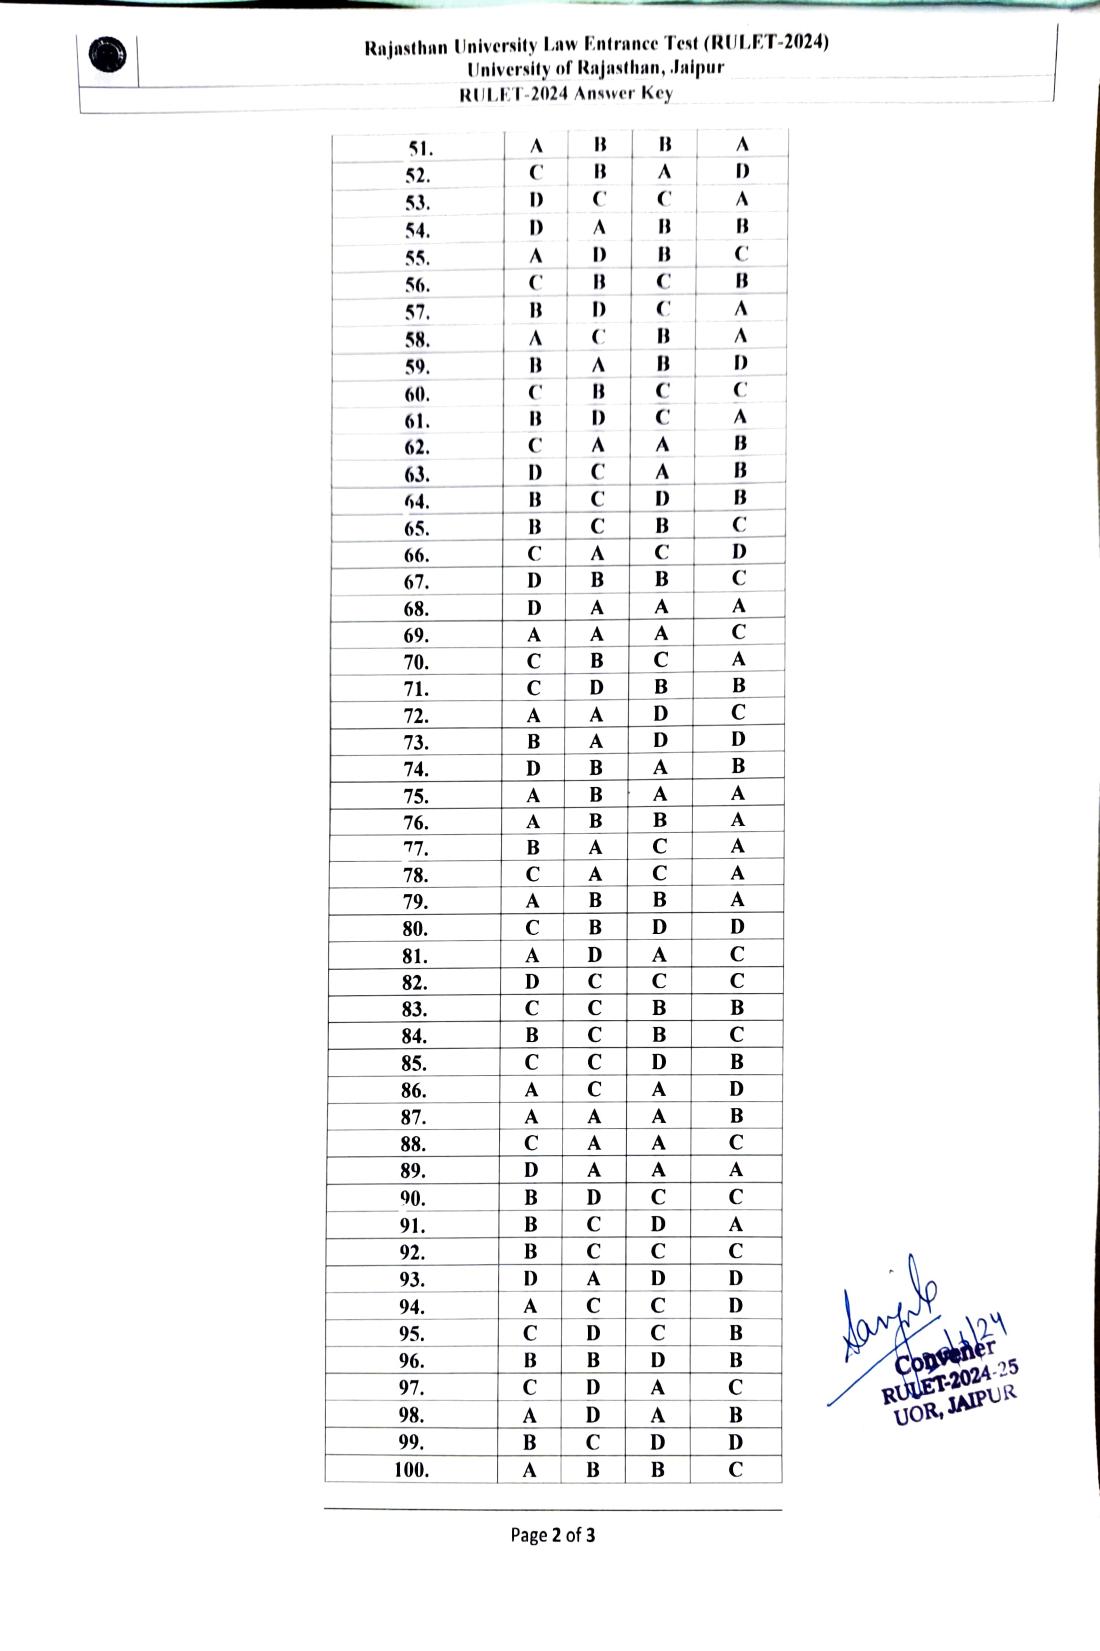 RULET 2024 Answer Key - Page 2